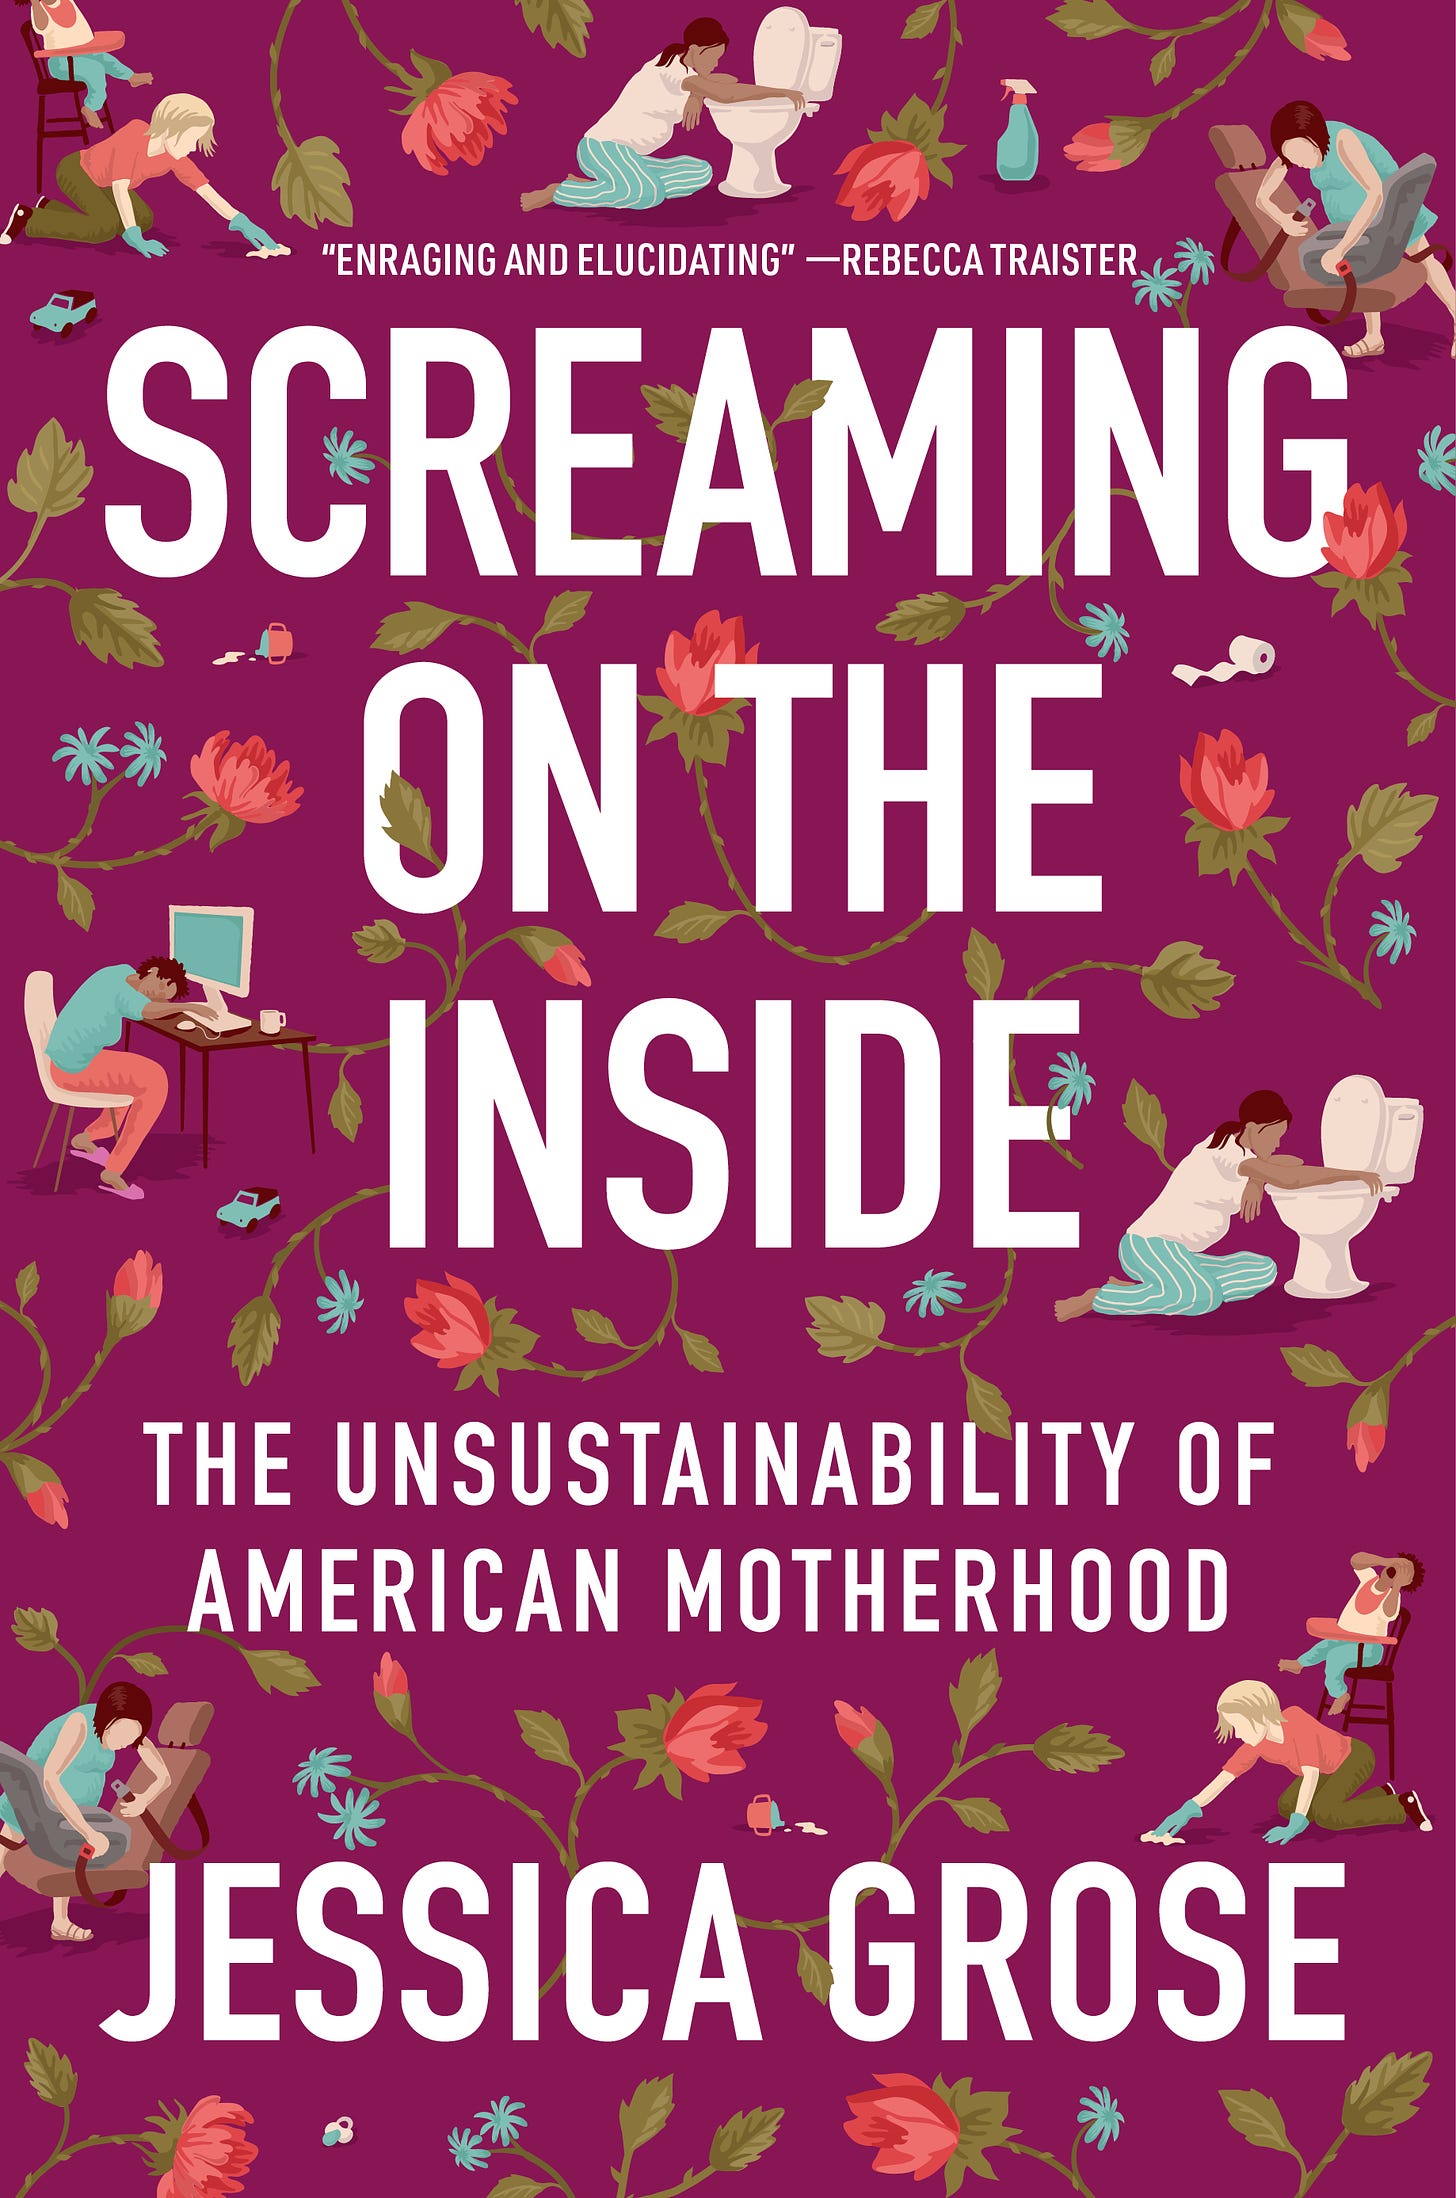 The cover of Jessica Grose's book, Screaming on the Inside: The Impossibility of American Motherhood," shows cartoon women engaged in the challenging everyday tasks of being a parent, like installing a car seat, puking into a toilet or cleaning up the food a toddler threw on the floor, interspersed with flowers